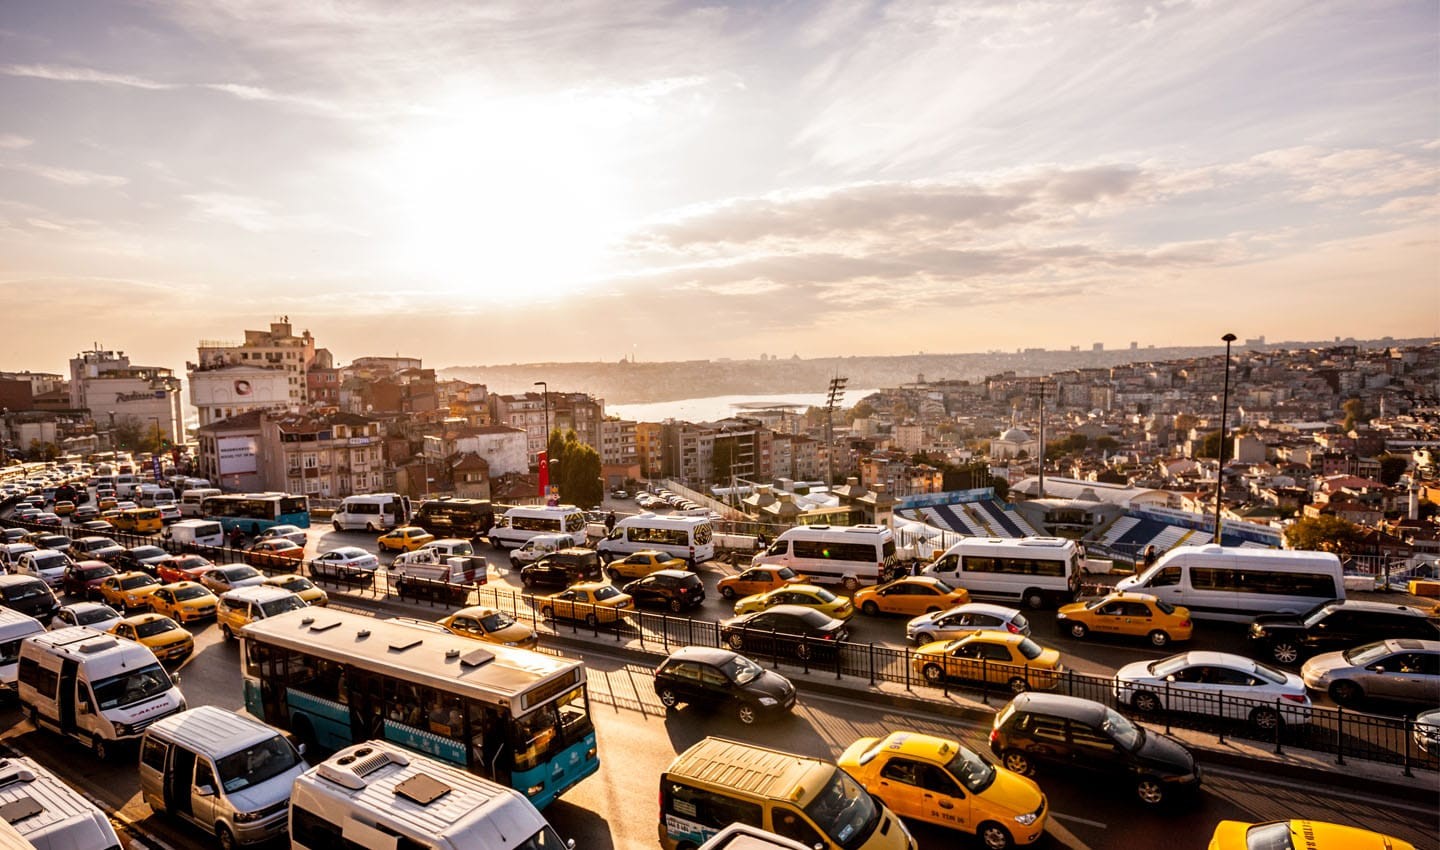 Istanbul, Turkey’s largest city and financial capital, was the most congested city in the world in 2021.